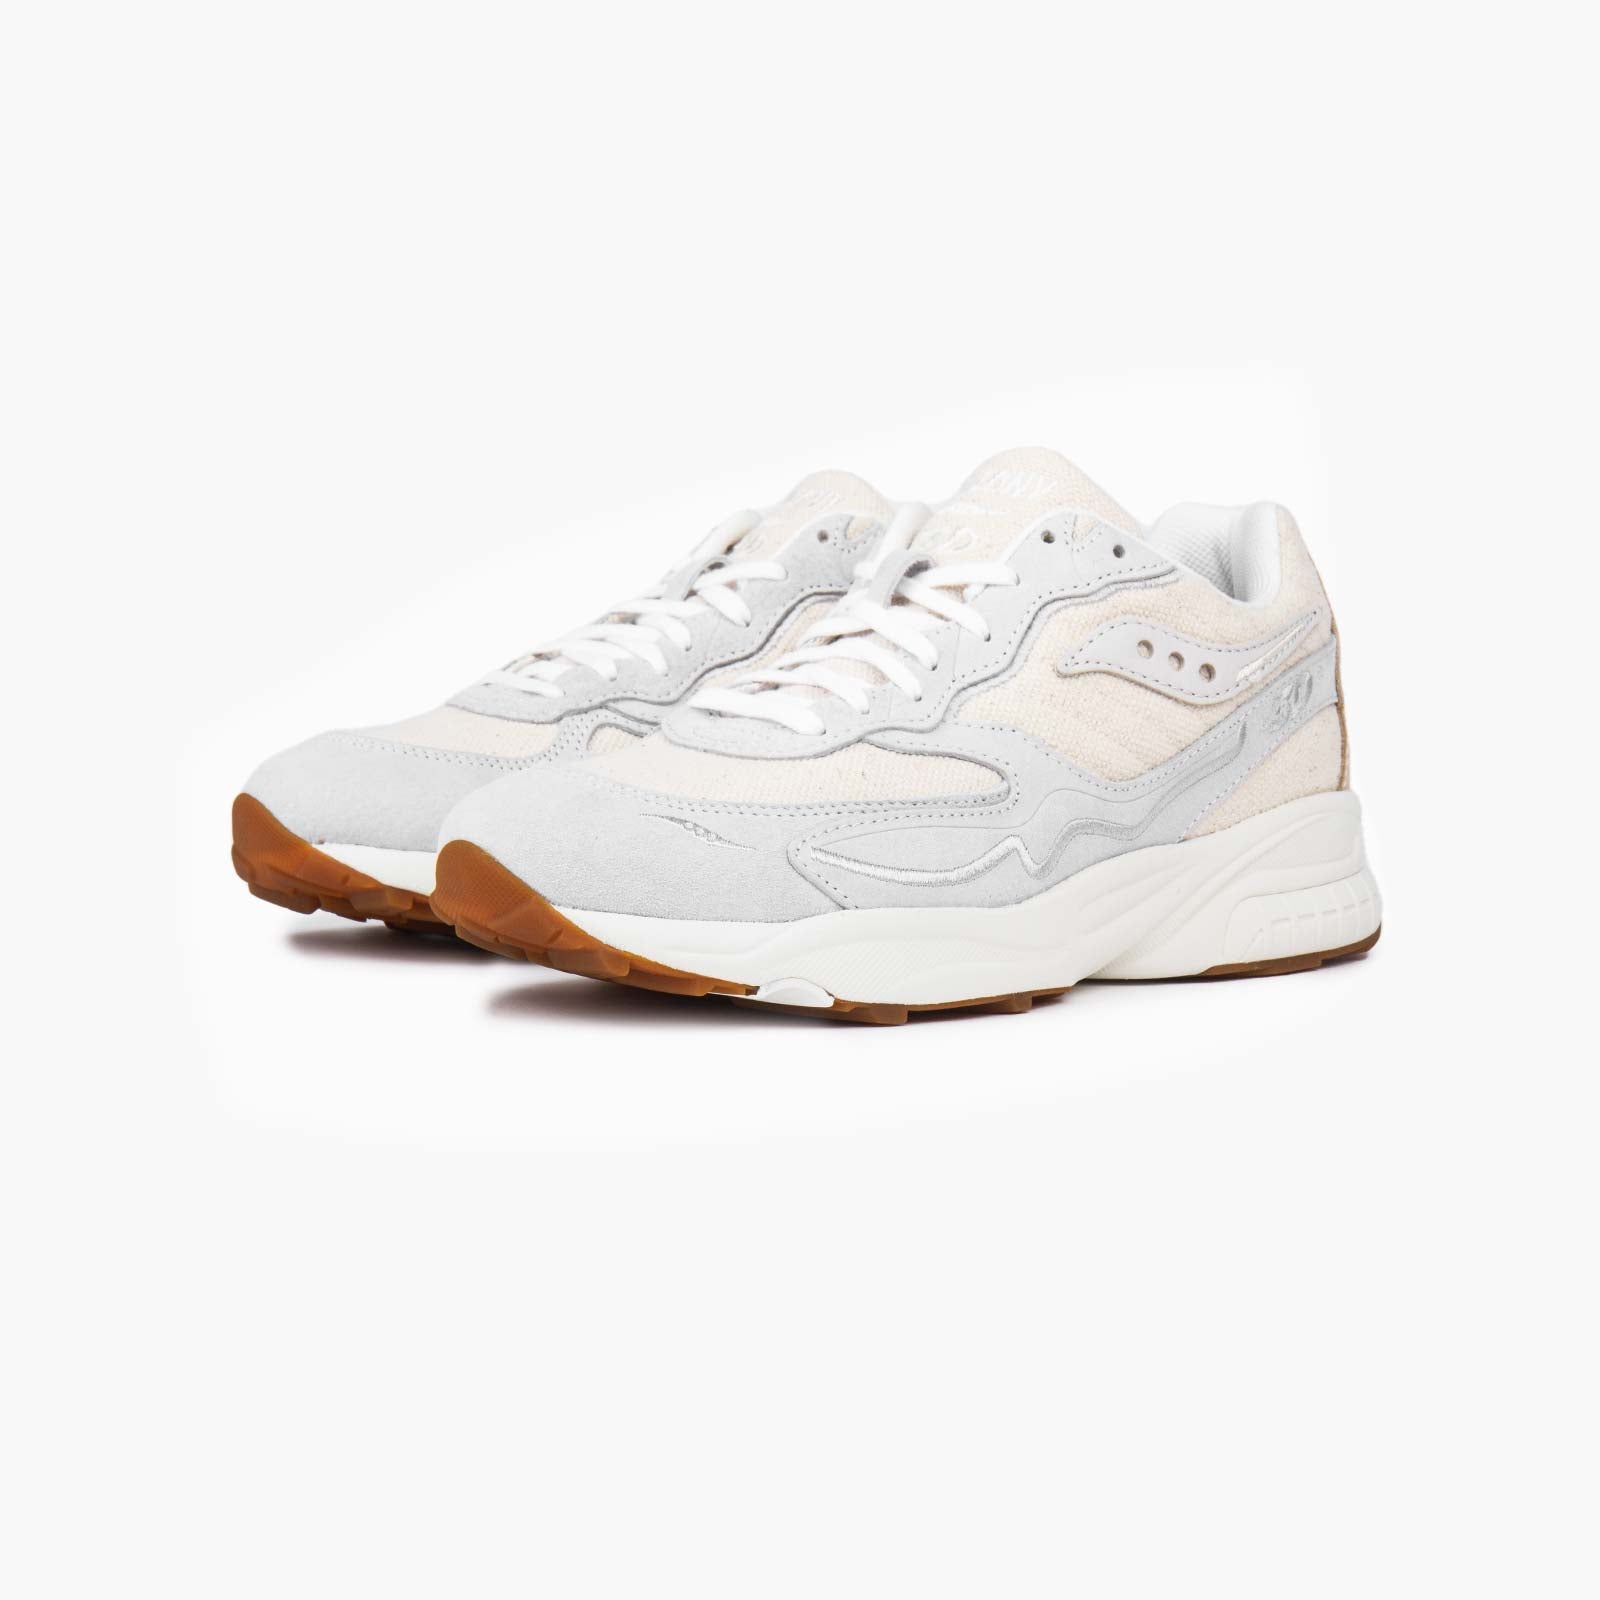 Saucony 3D Grid Hurricane Undyed-SUEDE Store